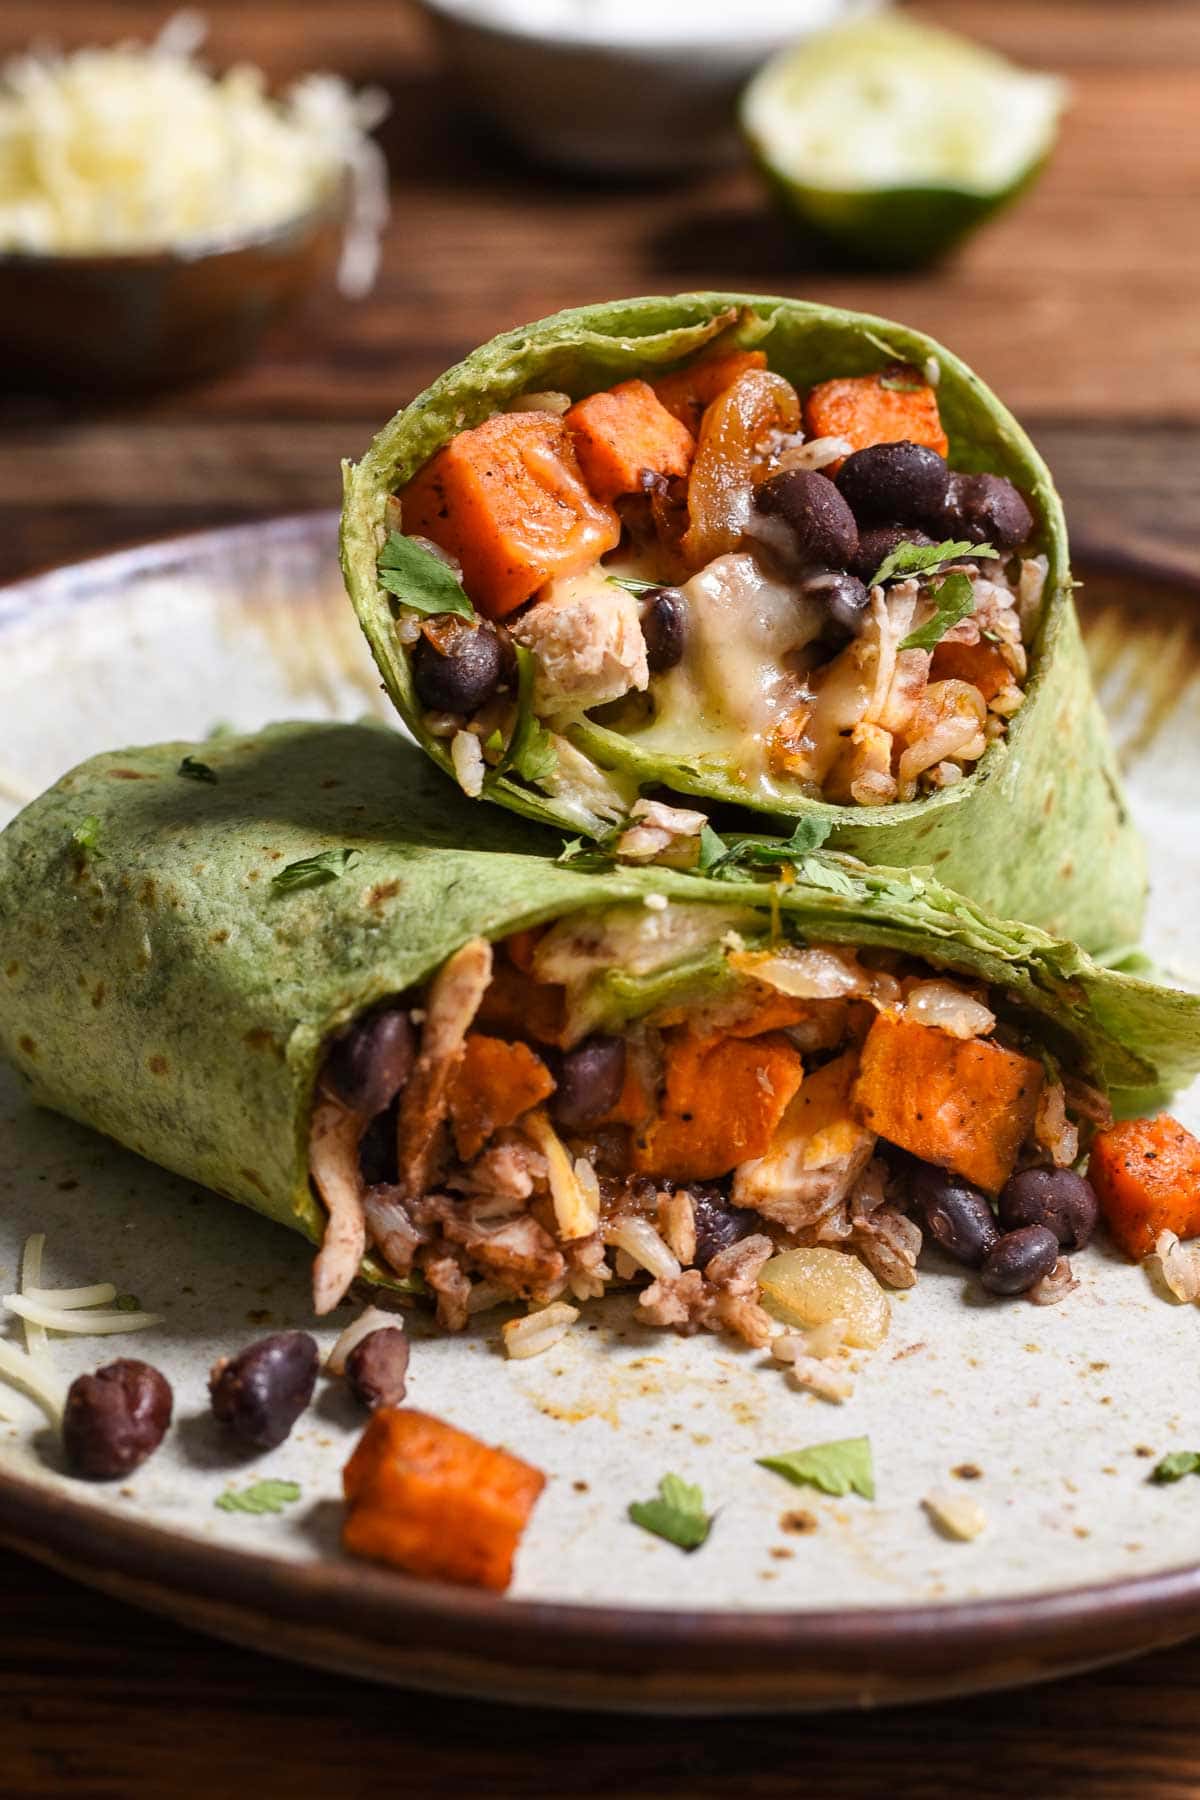 Sweet Potato Black Bean Burritos are loaded with protein, melty cheese, spicy black beans, and smoky maple sweet potatoes. The perfect freezer meal!